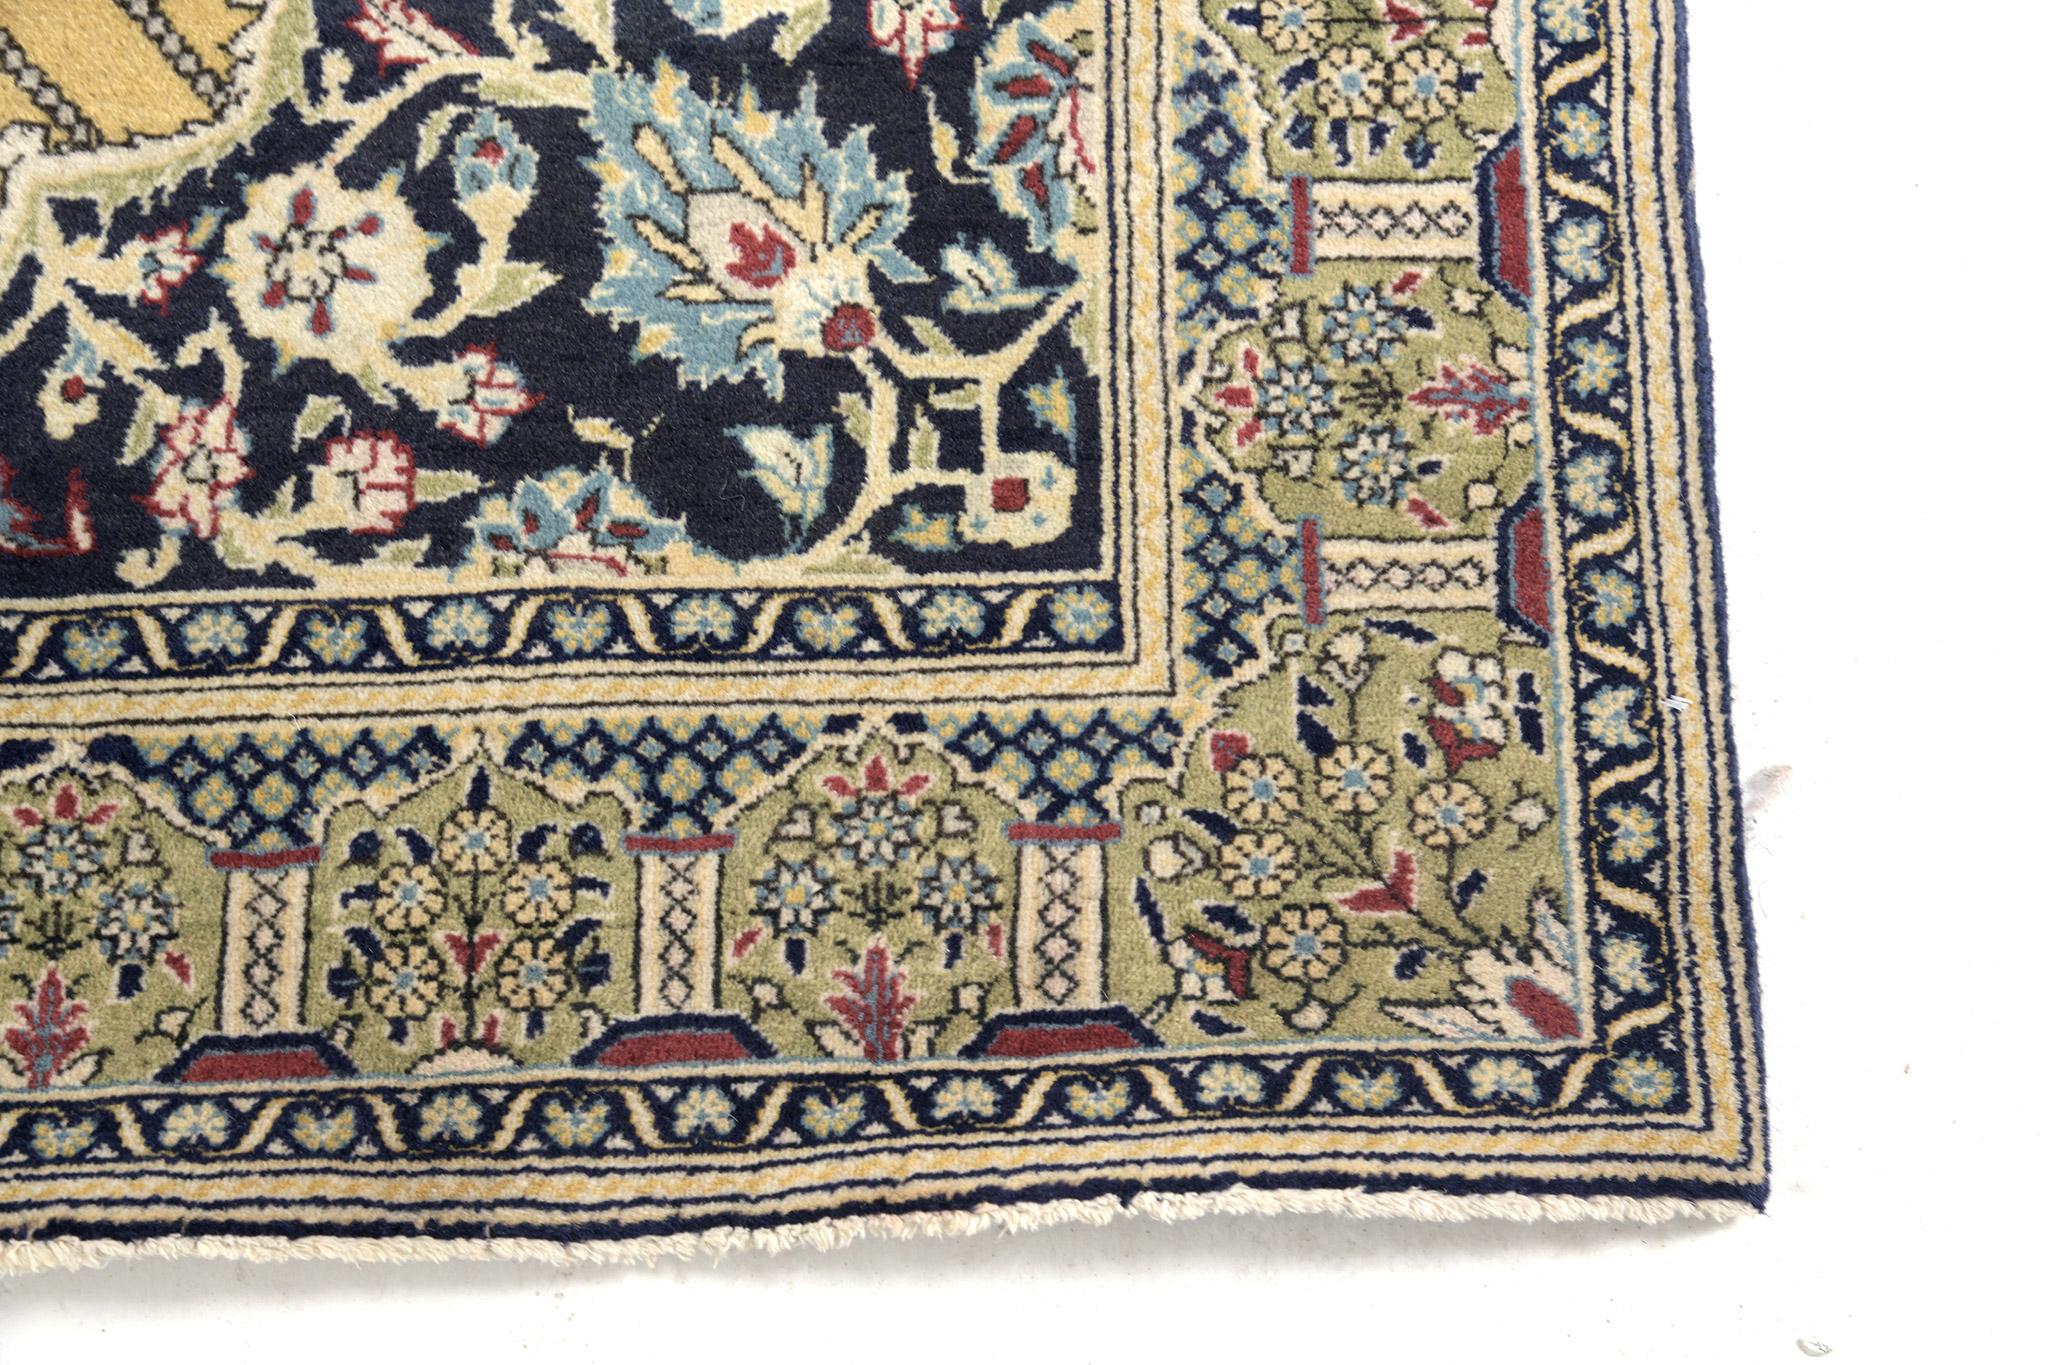 This vivid and trendy masterpiece of the Persian Qum rug from our collection features a majestic all-over design. The impressive paradise art with a bird design makes the rug more stylish. A glorious lush and greenery pattern is perfect for a